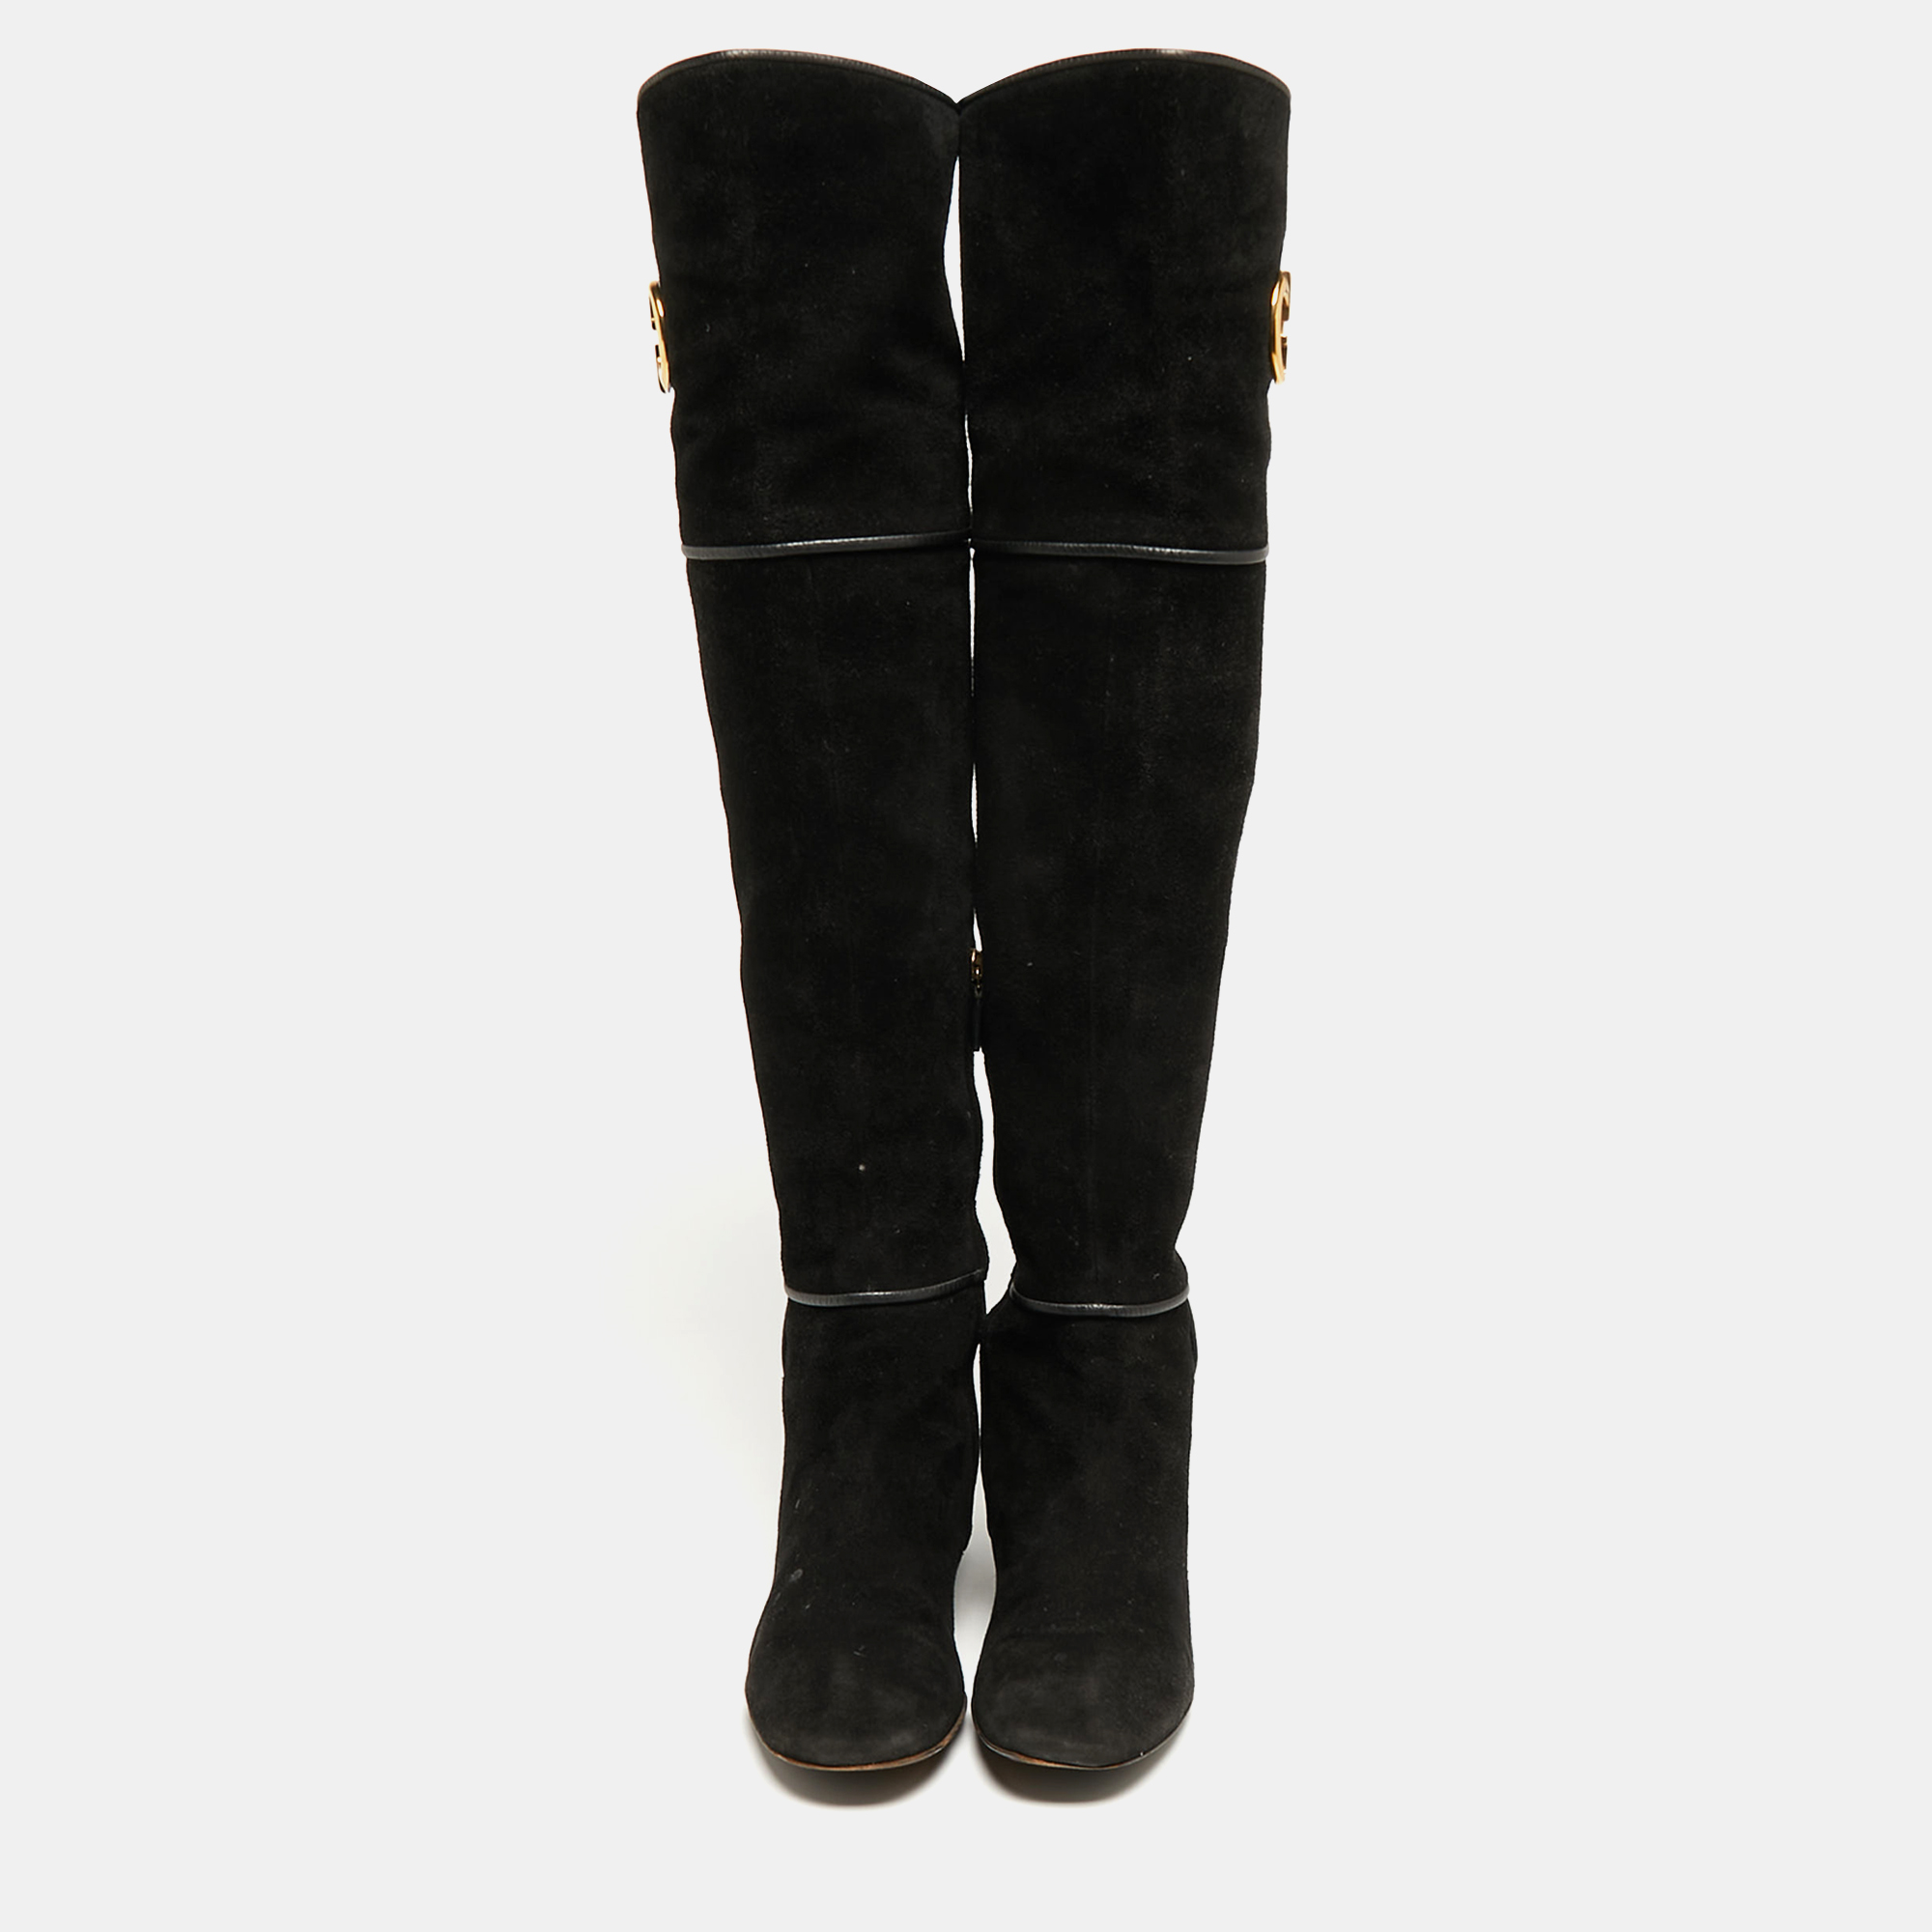 Gucci Black Suede Knee Length Boots Size 38.5